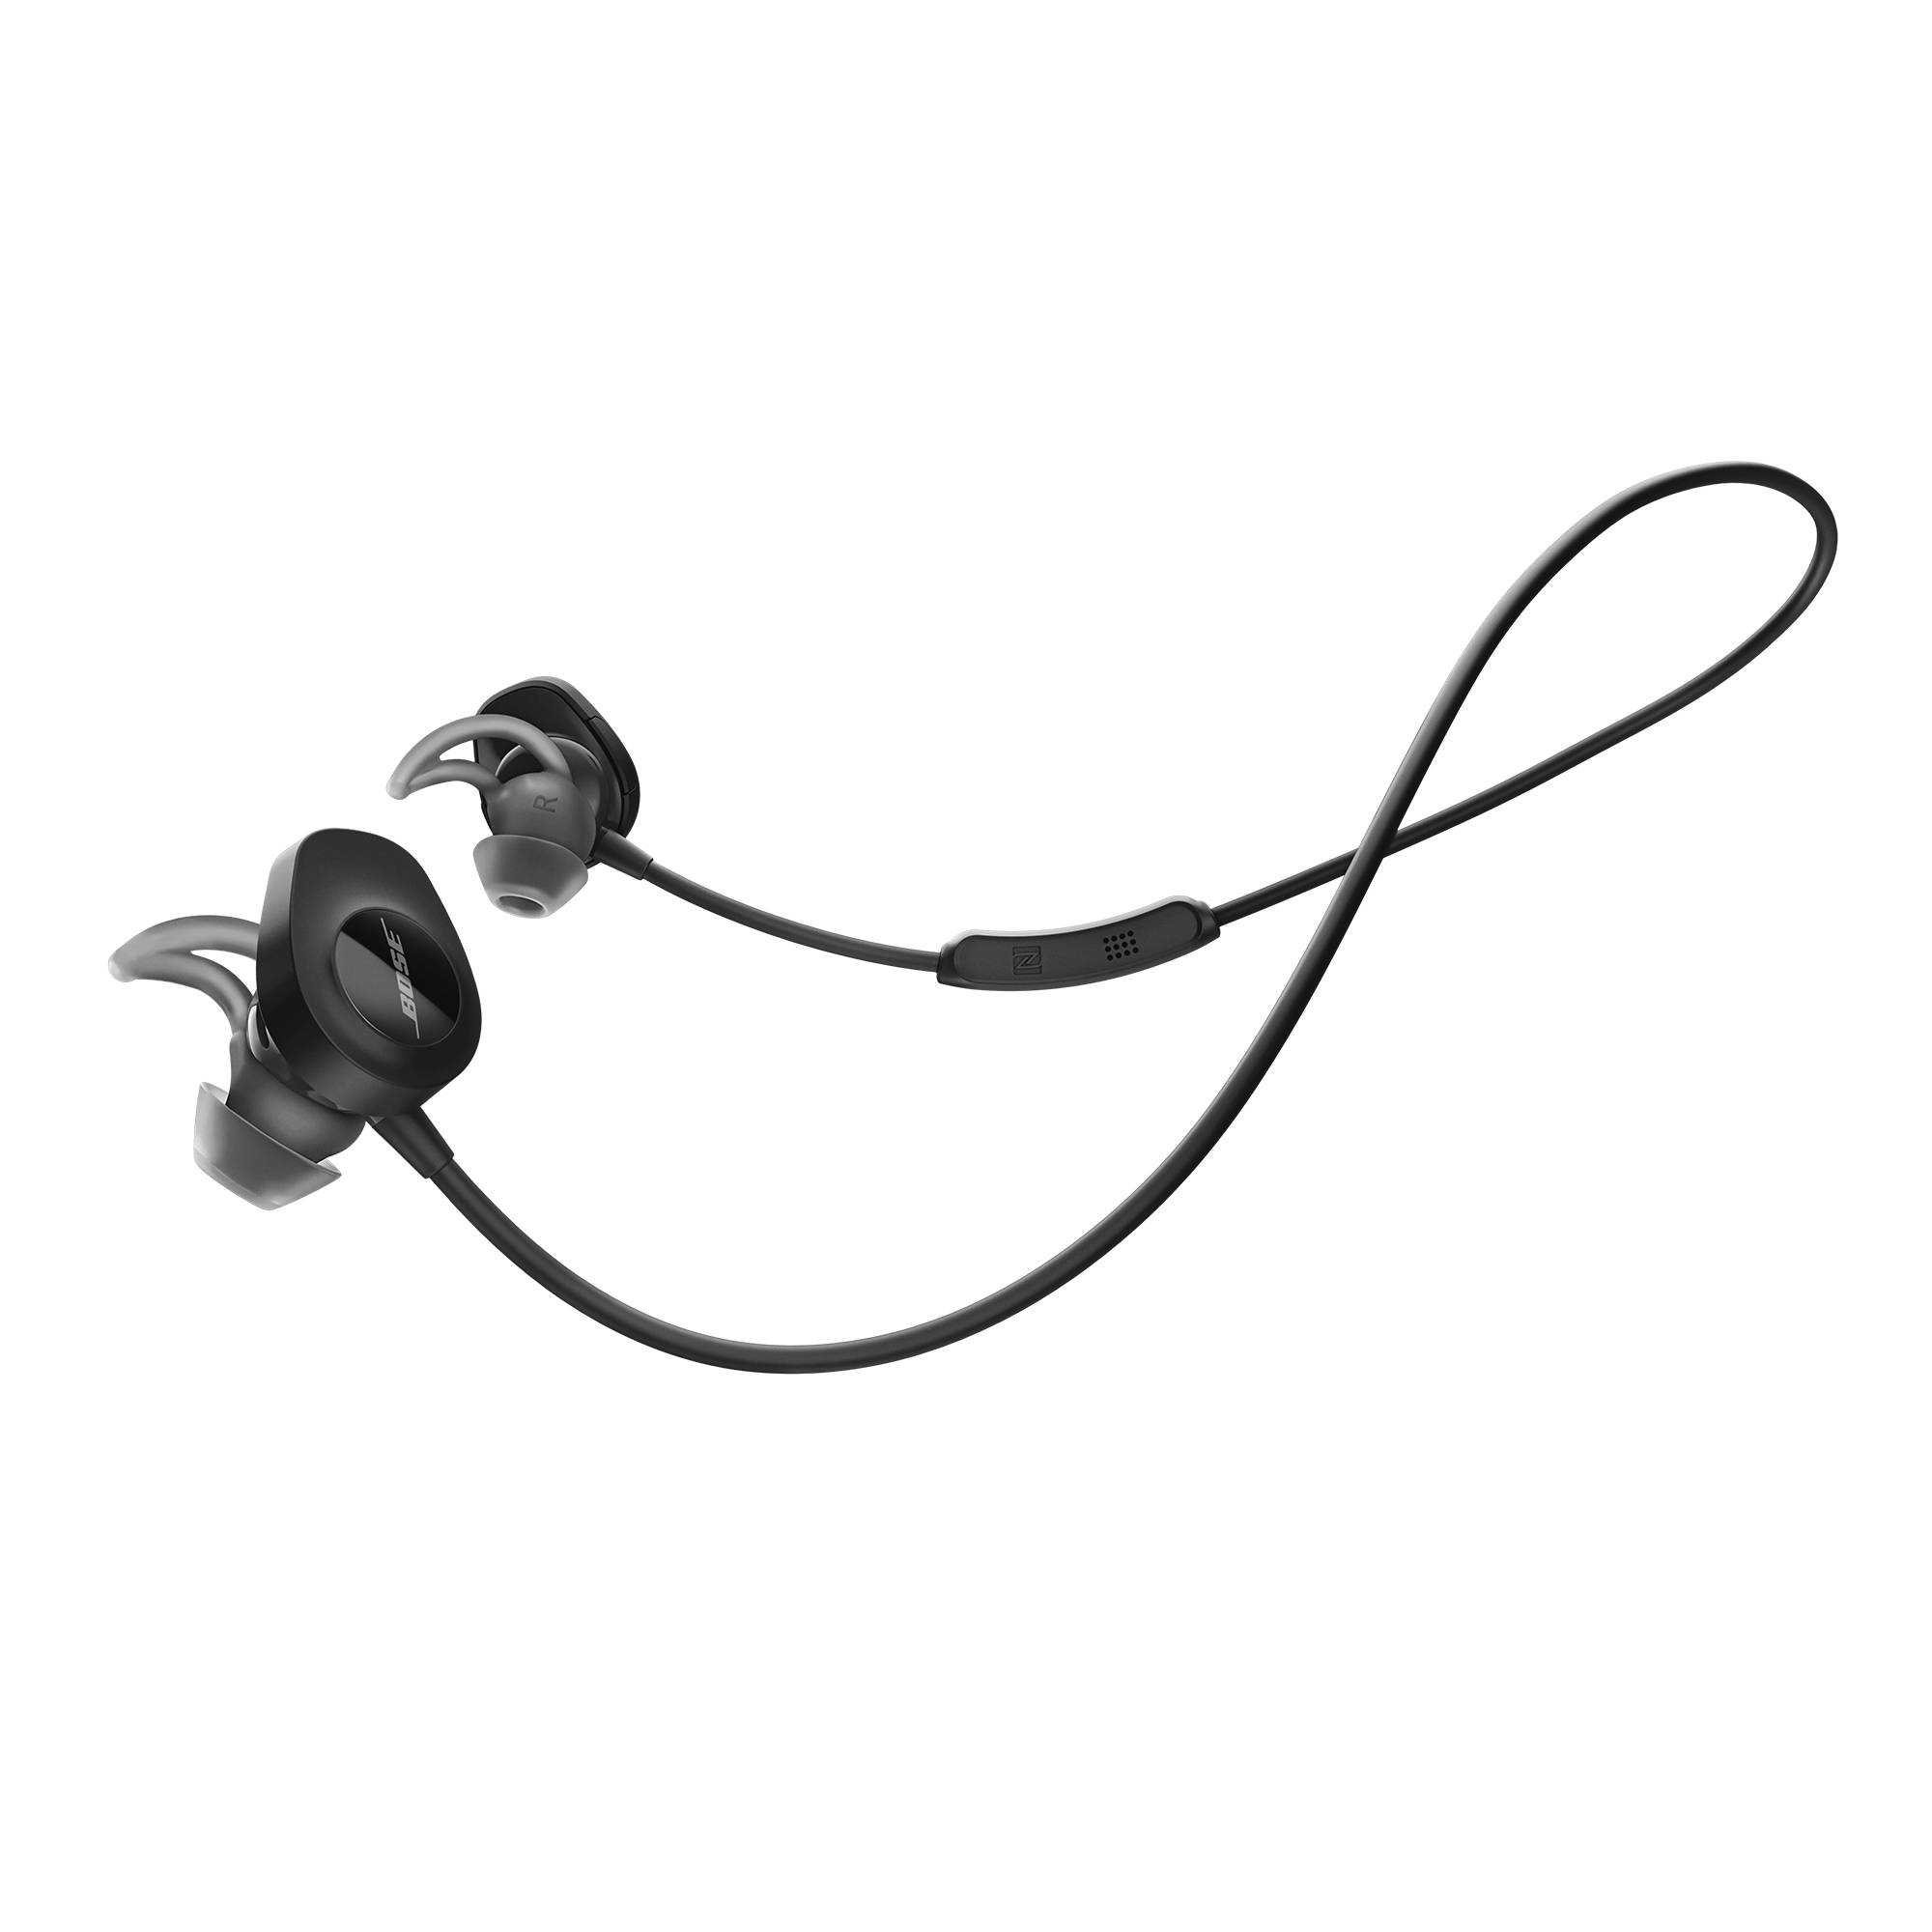 Bose SoundSport (With Mic, In-Ear, Bluetooth Wireless Earphones, Without Noise Cancellation, Sweat resistant, 6 Hrs battery life per charge
)